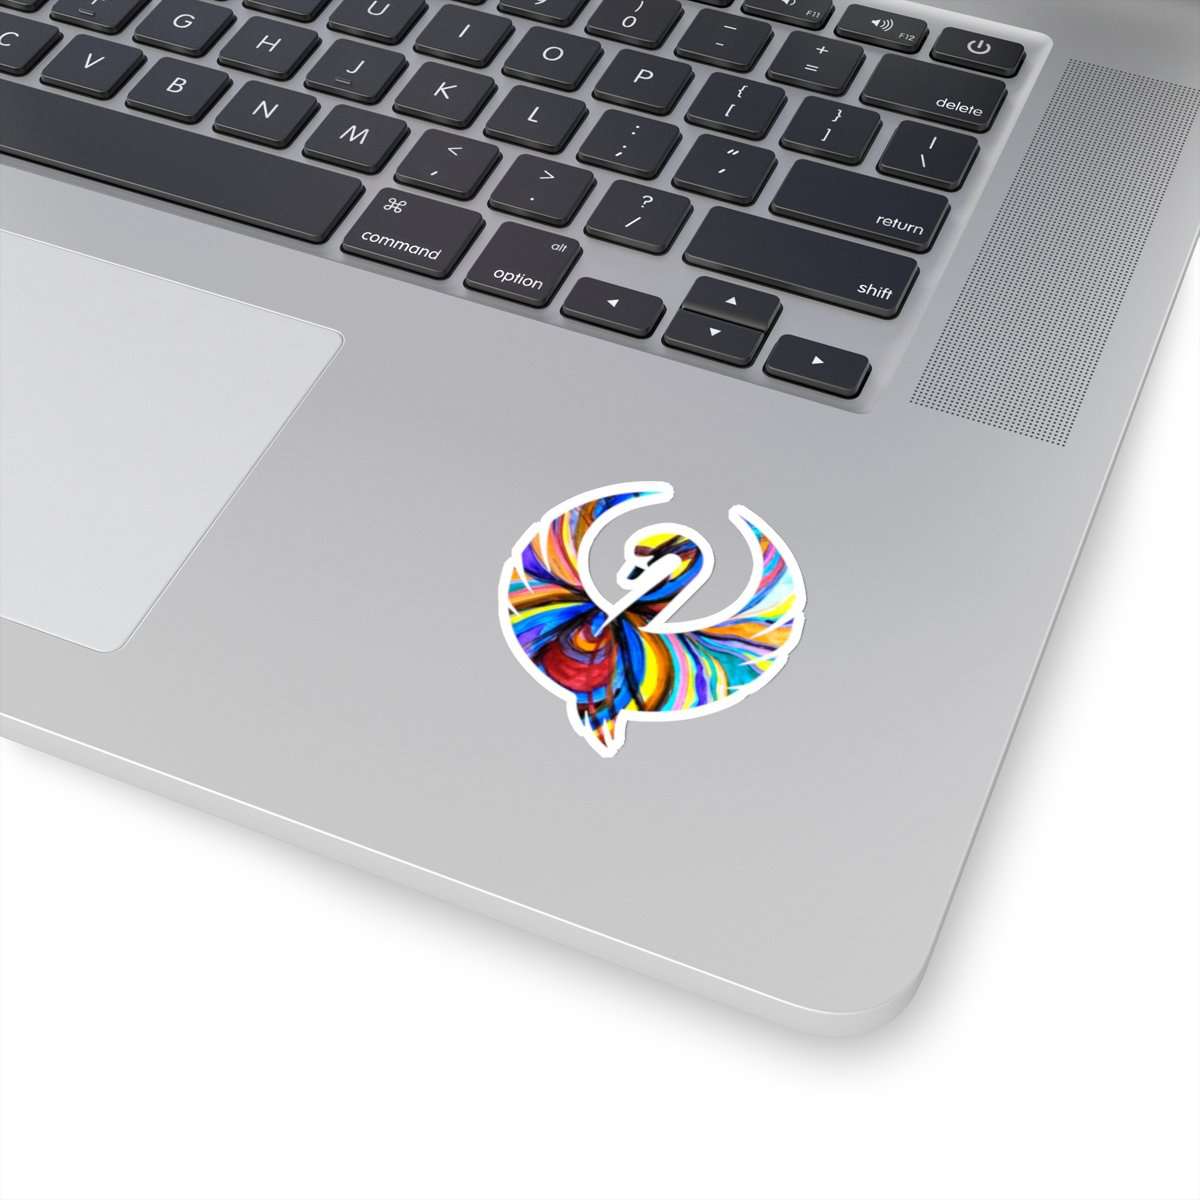 buy-and-sell-relationship-swan-stickers-online-now_3.jpg